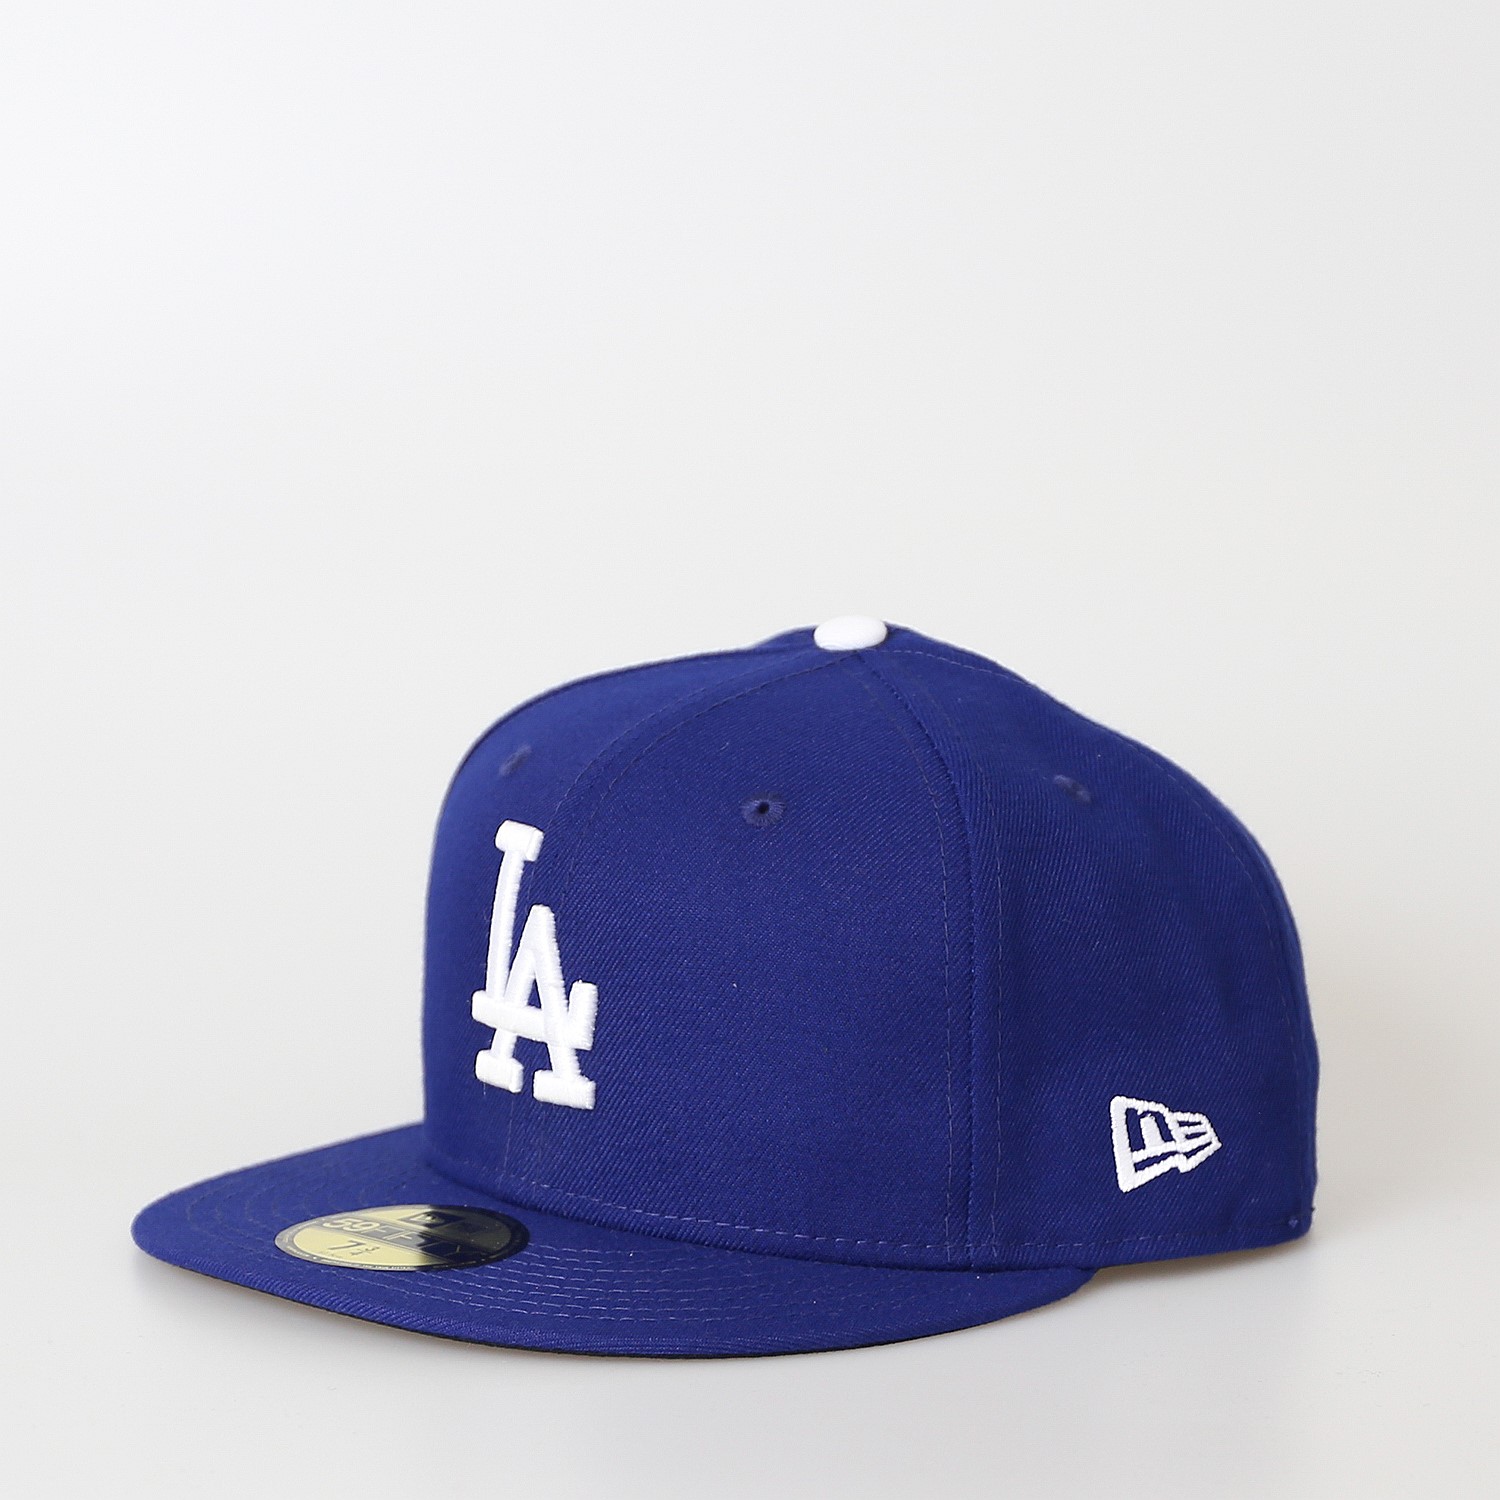 5950 Fitted Los Angeles Dodgers Cap, Caps & Hats